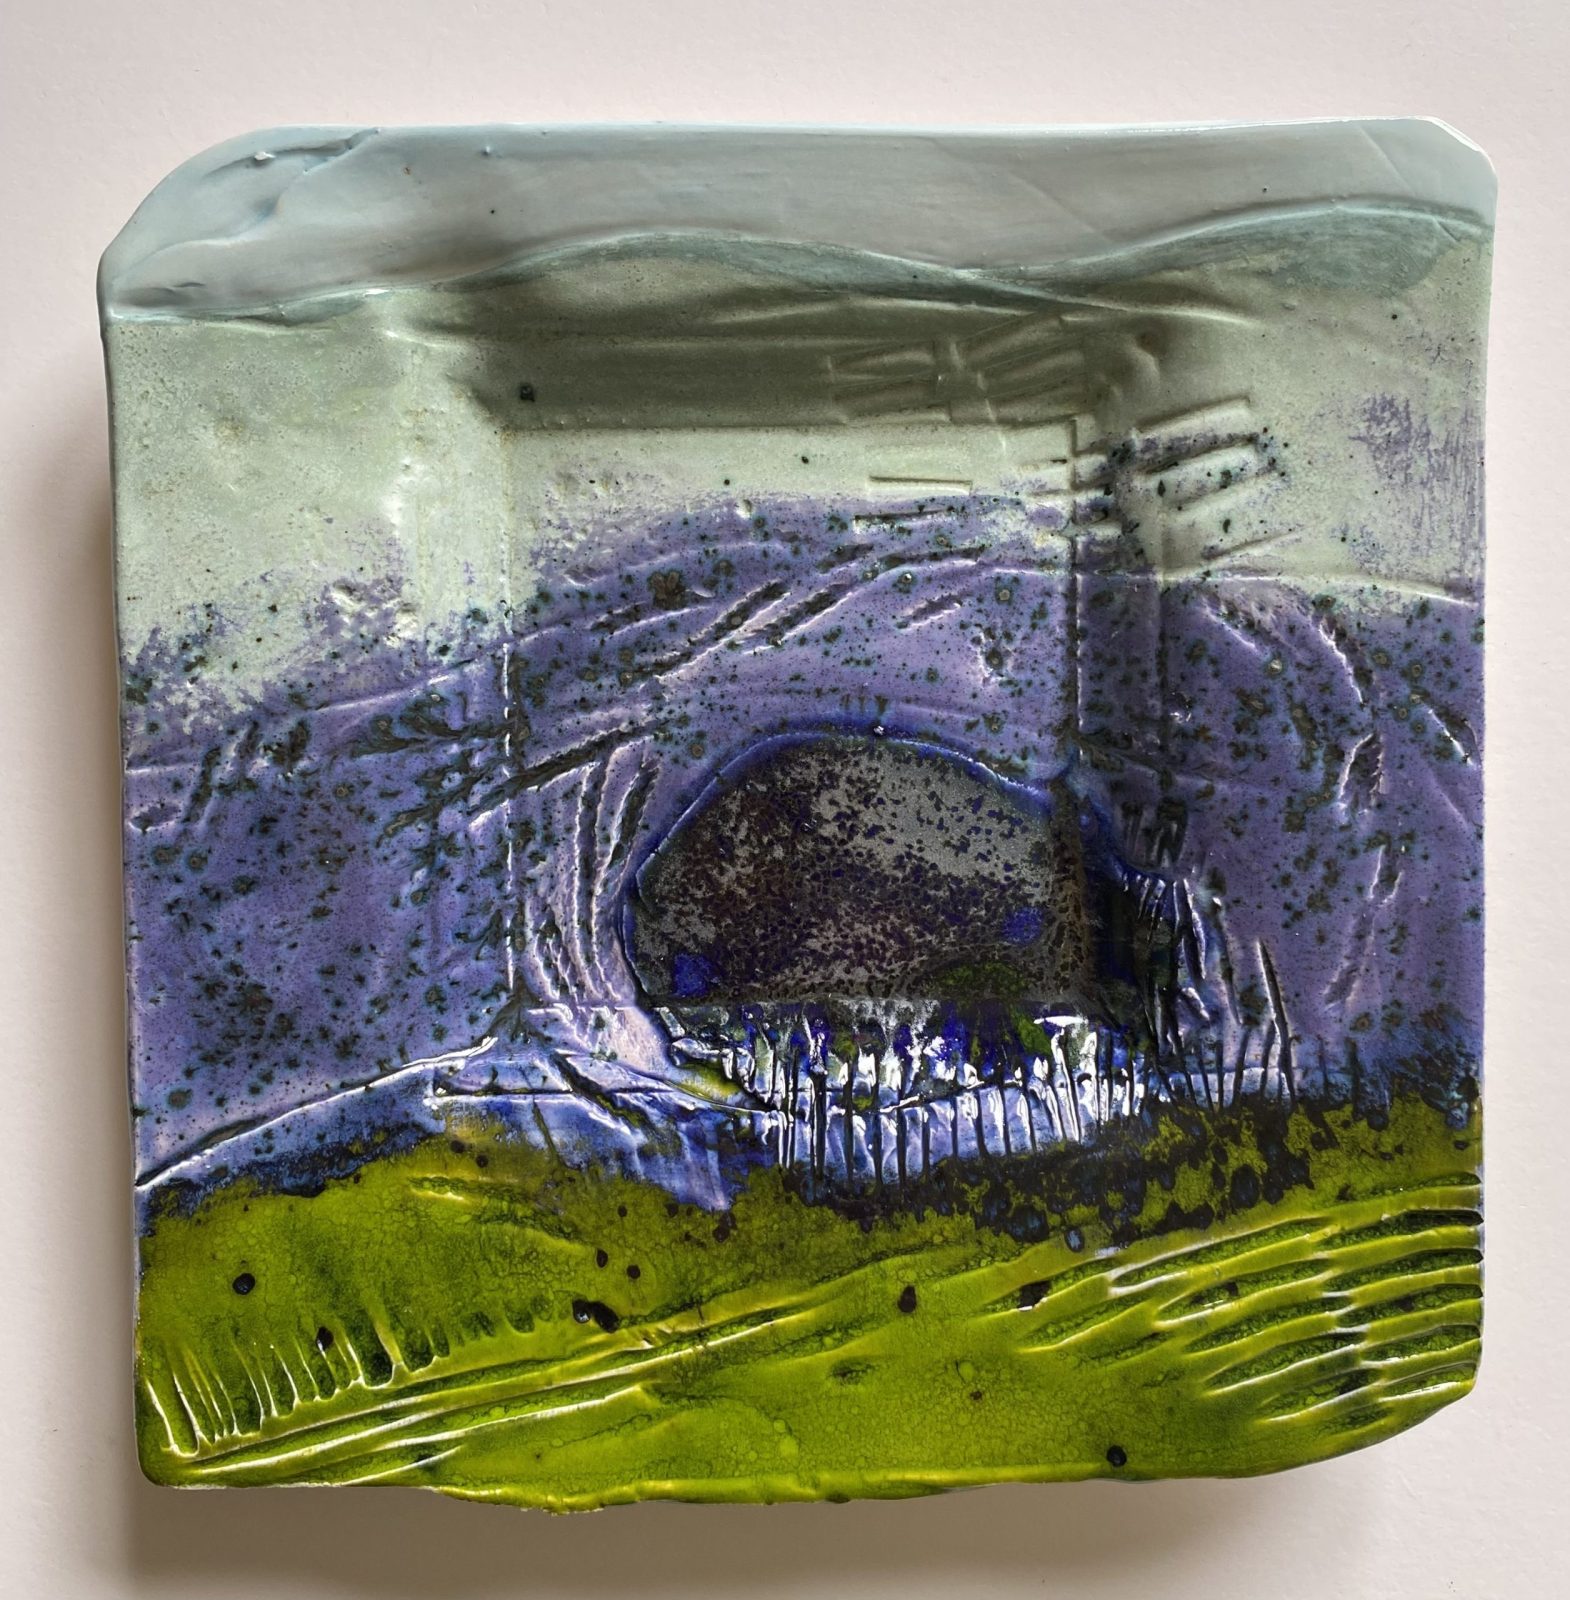 Ceramic landscape with purple and green stripe and metallic blue lake